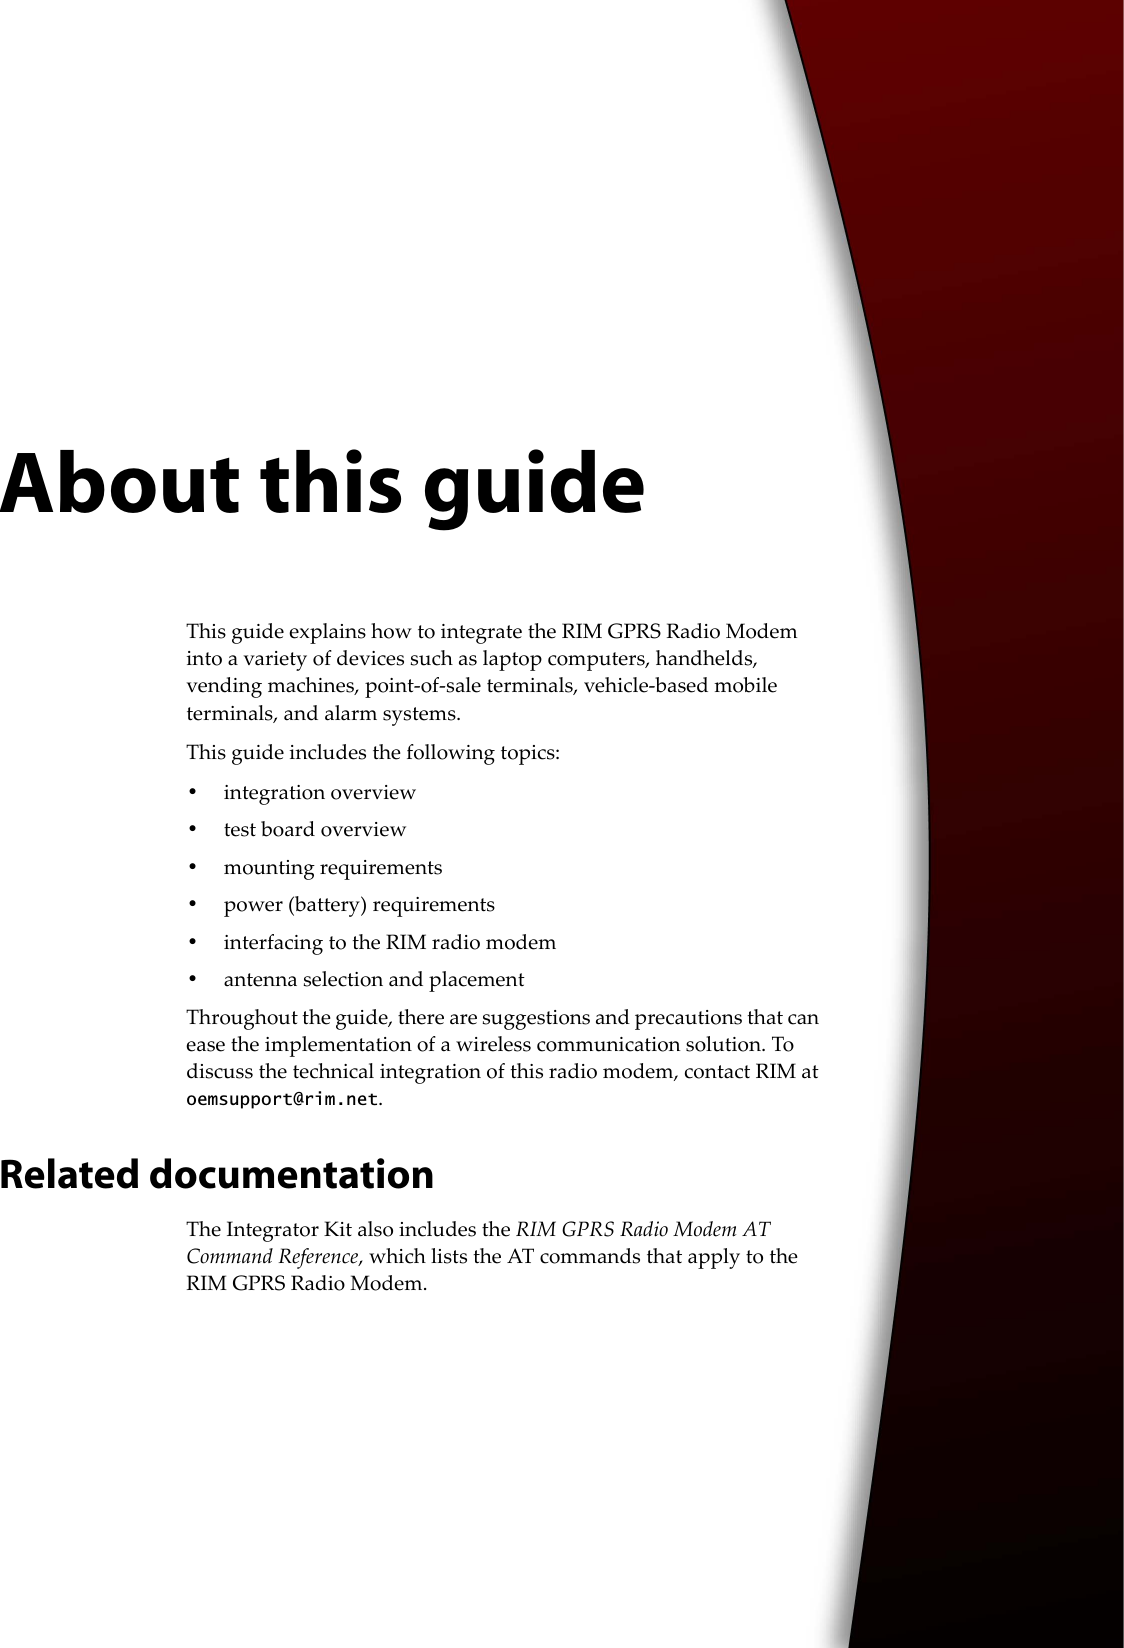 About this guideThis guide explains how to integrate the RIM GPRS Radio Modem into a variety of devices such as laptop computers, handhelds, vending machines, point-of-sale terminals, vehicle-based mobile terminals, and alarm systems.This guide includes the following topics:•integration overview•test board overview•mounting requirements•power (battery) requirements•interfacing to the RIM radio modem•antenna selection and placementThroughout the guide, there are suggestions and precautions that can ease the implementation of a wireless communication solution. To discuss the technical integration of this radio modem, contact RIM at oemsupport@rim.net.Related documentationThe Integrator Kit also includes the RIM GPRS Radio Modem AT Command Reference, which lists the AT commands that apply to the RIM GPRS Radio Modem.